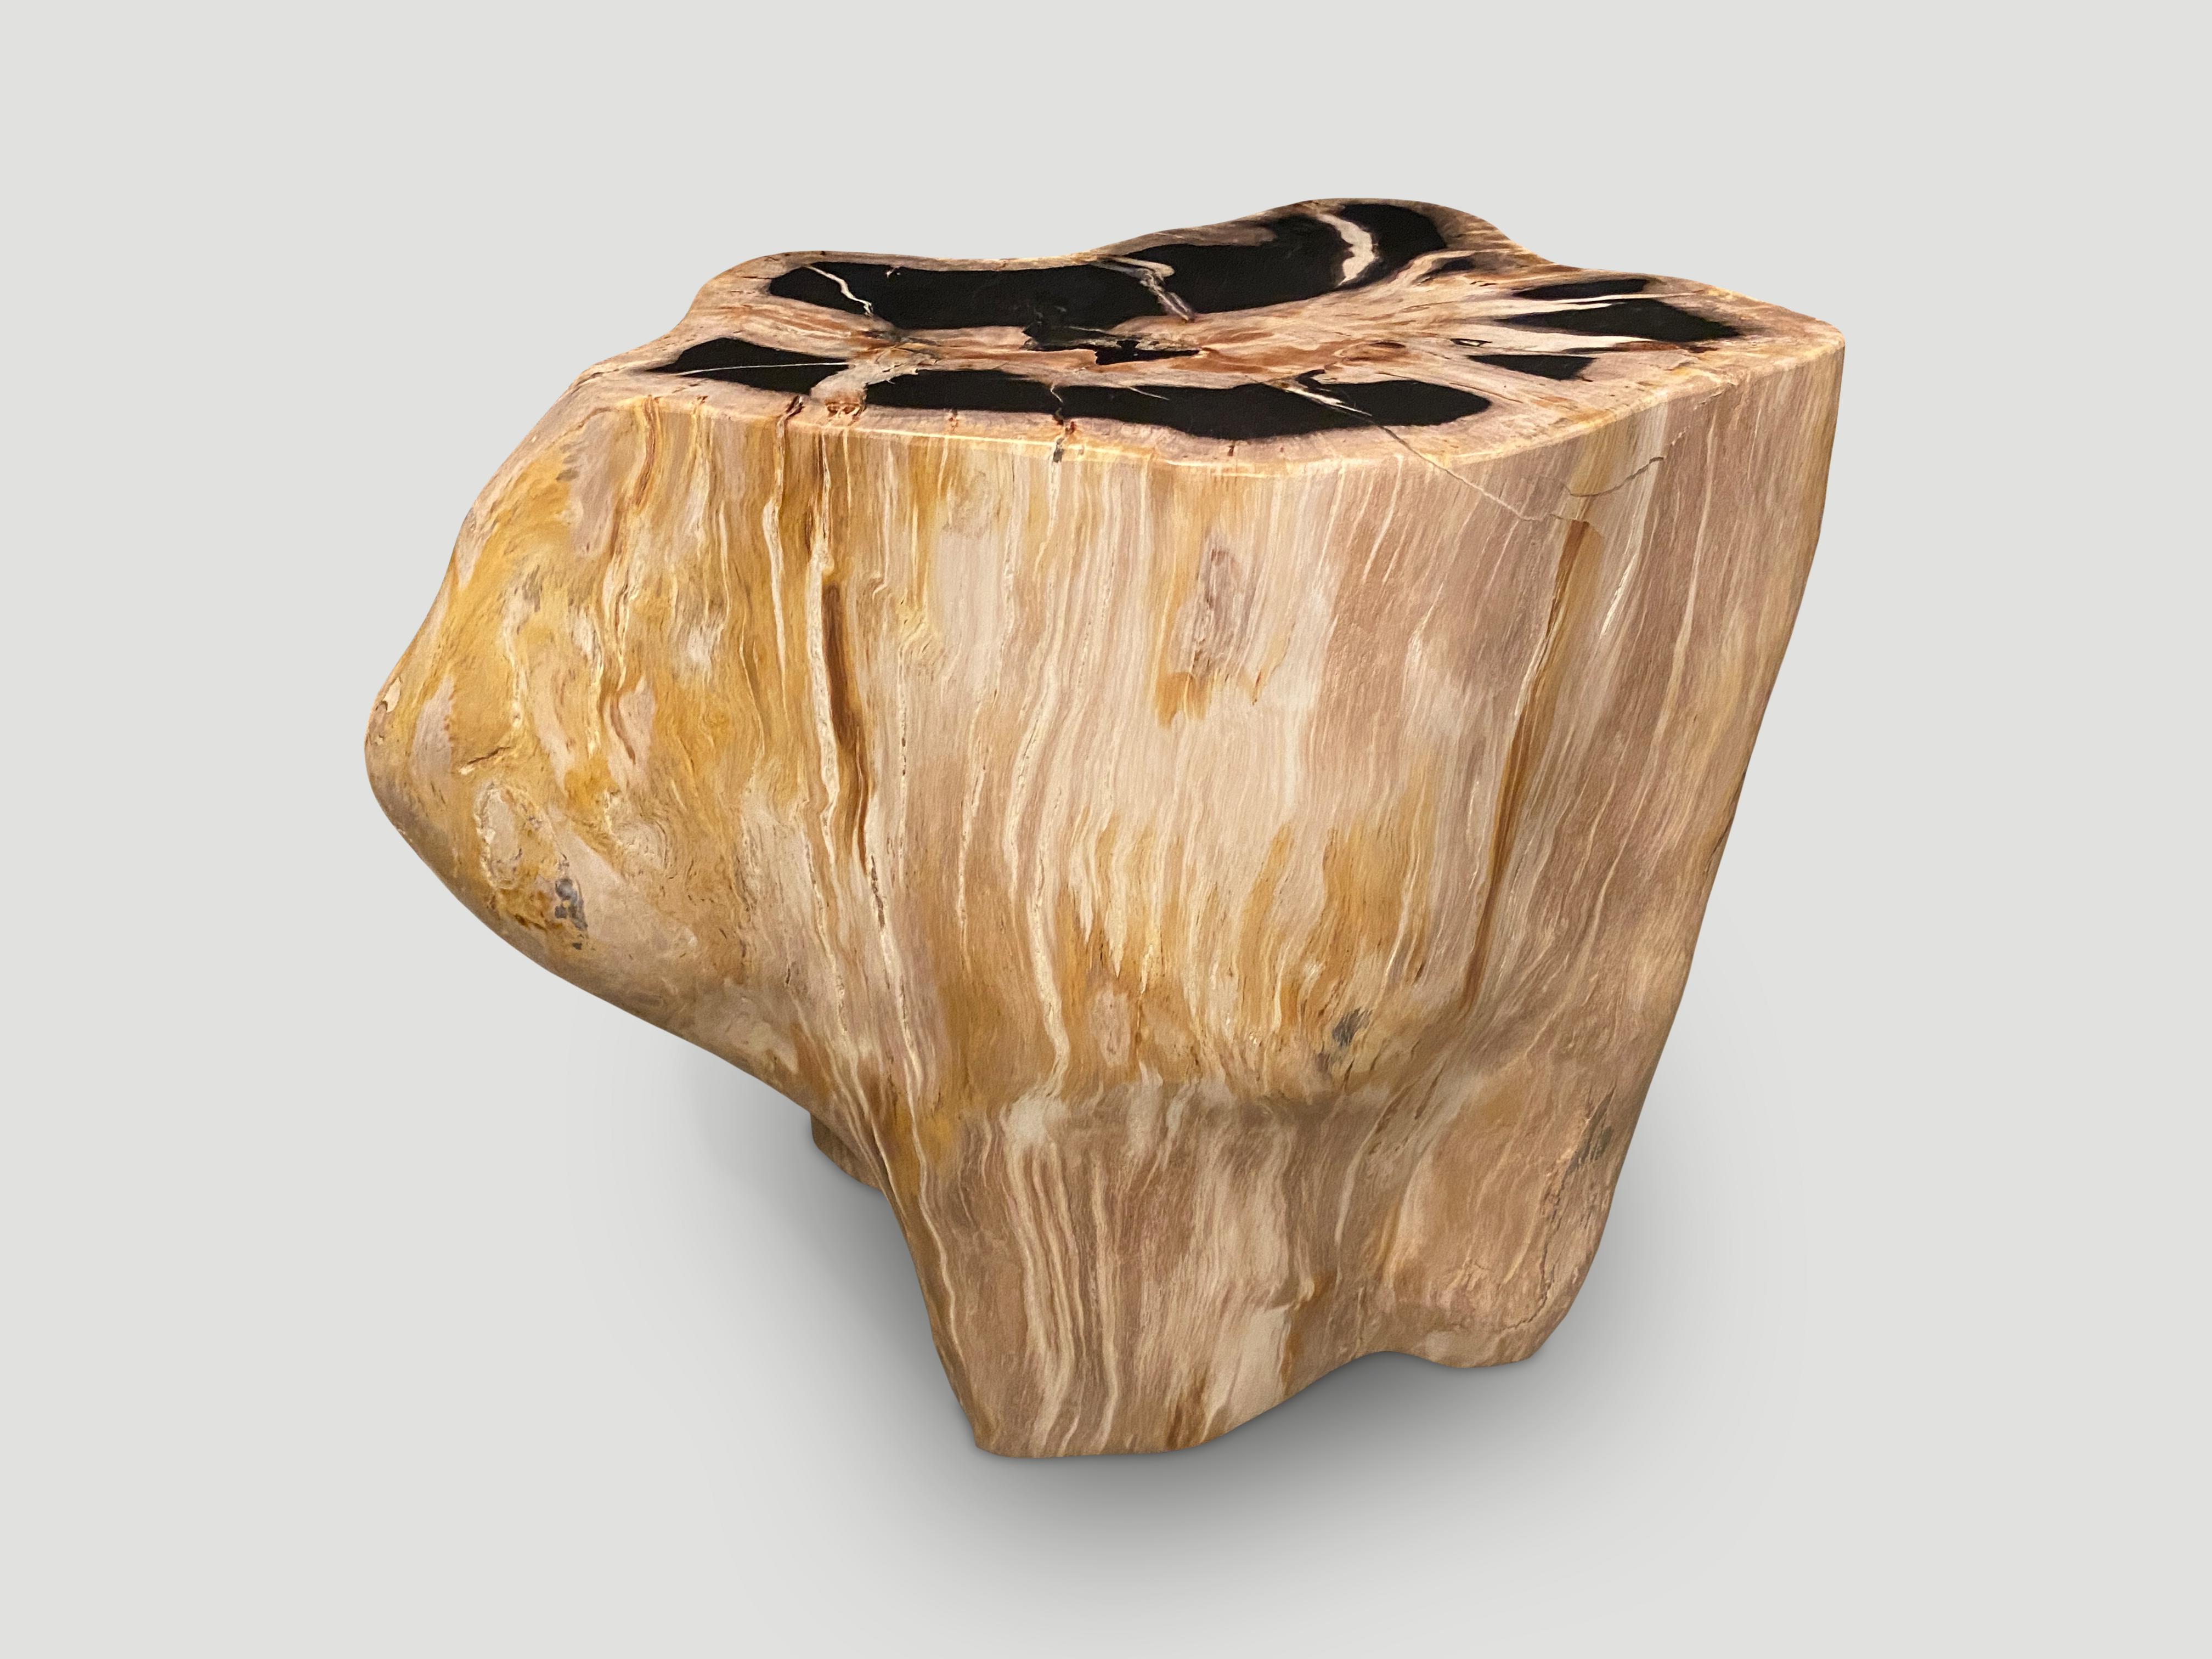 Beautiful contrasting tones and markings on this high quality petrified wood side table. It’s fascinating how Mother Nature produces these stunning 40 million year old petrified teak logs with such contrasting colors and natural patterns throughout.